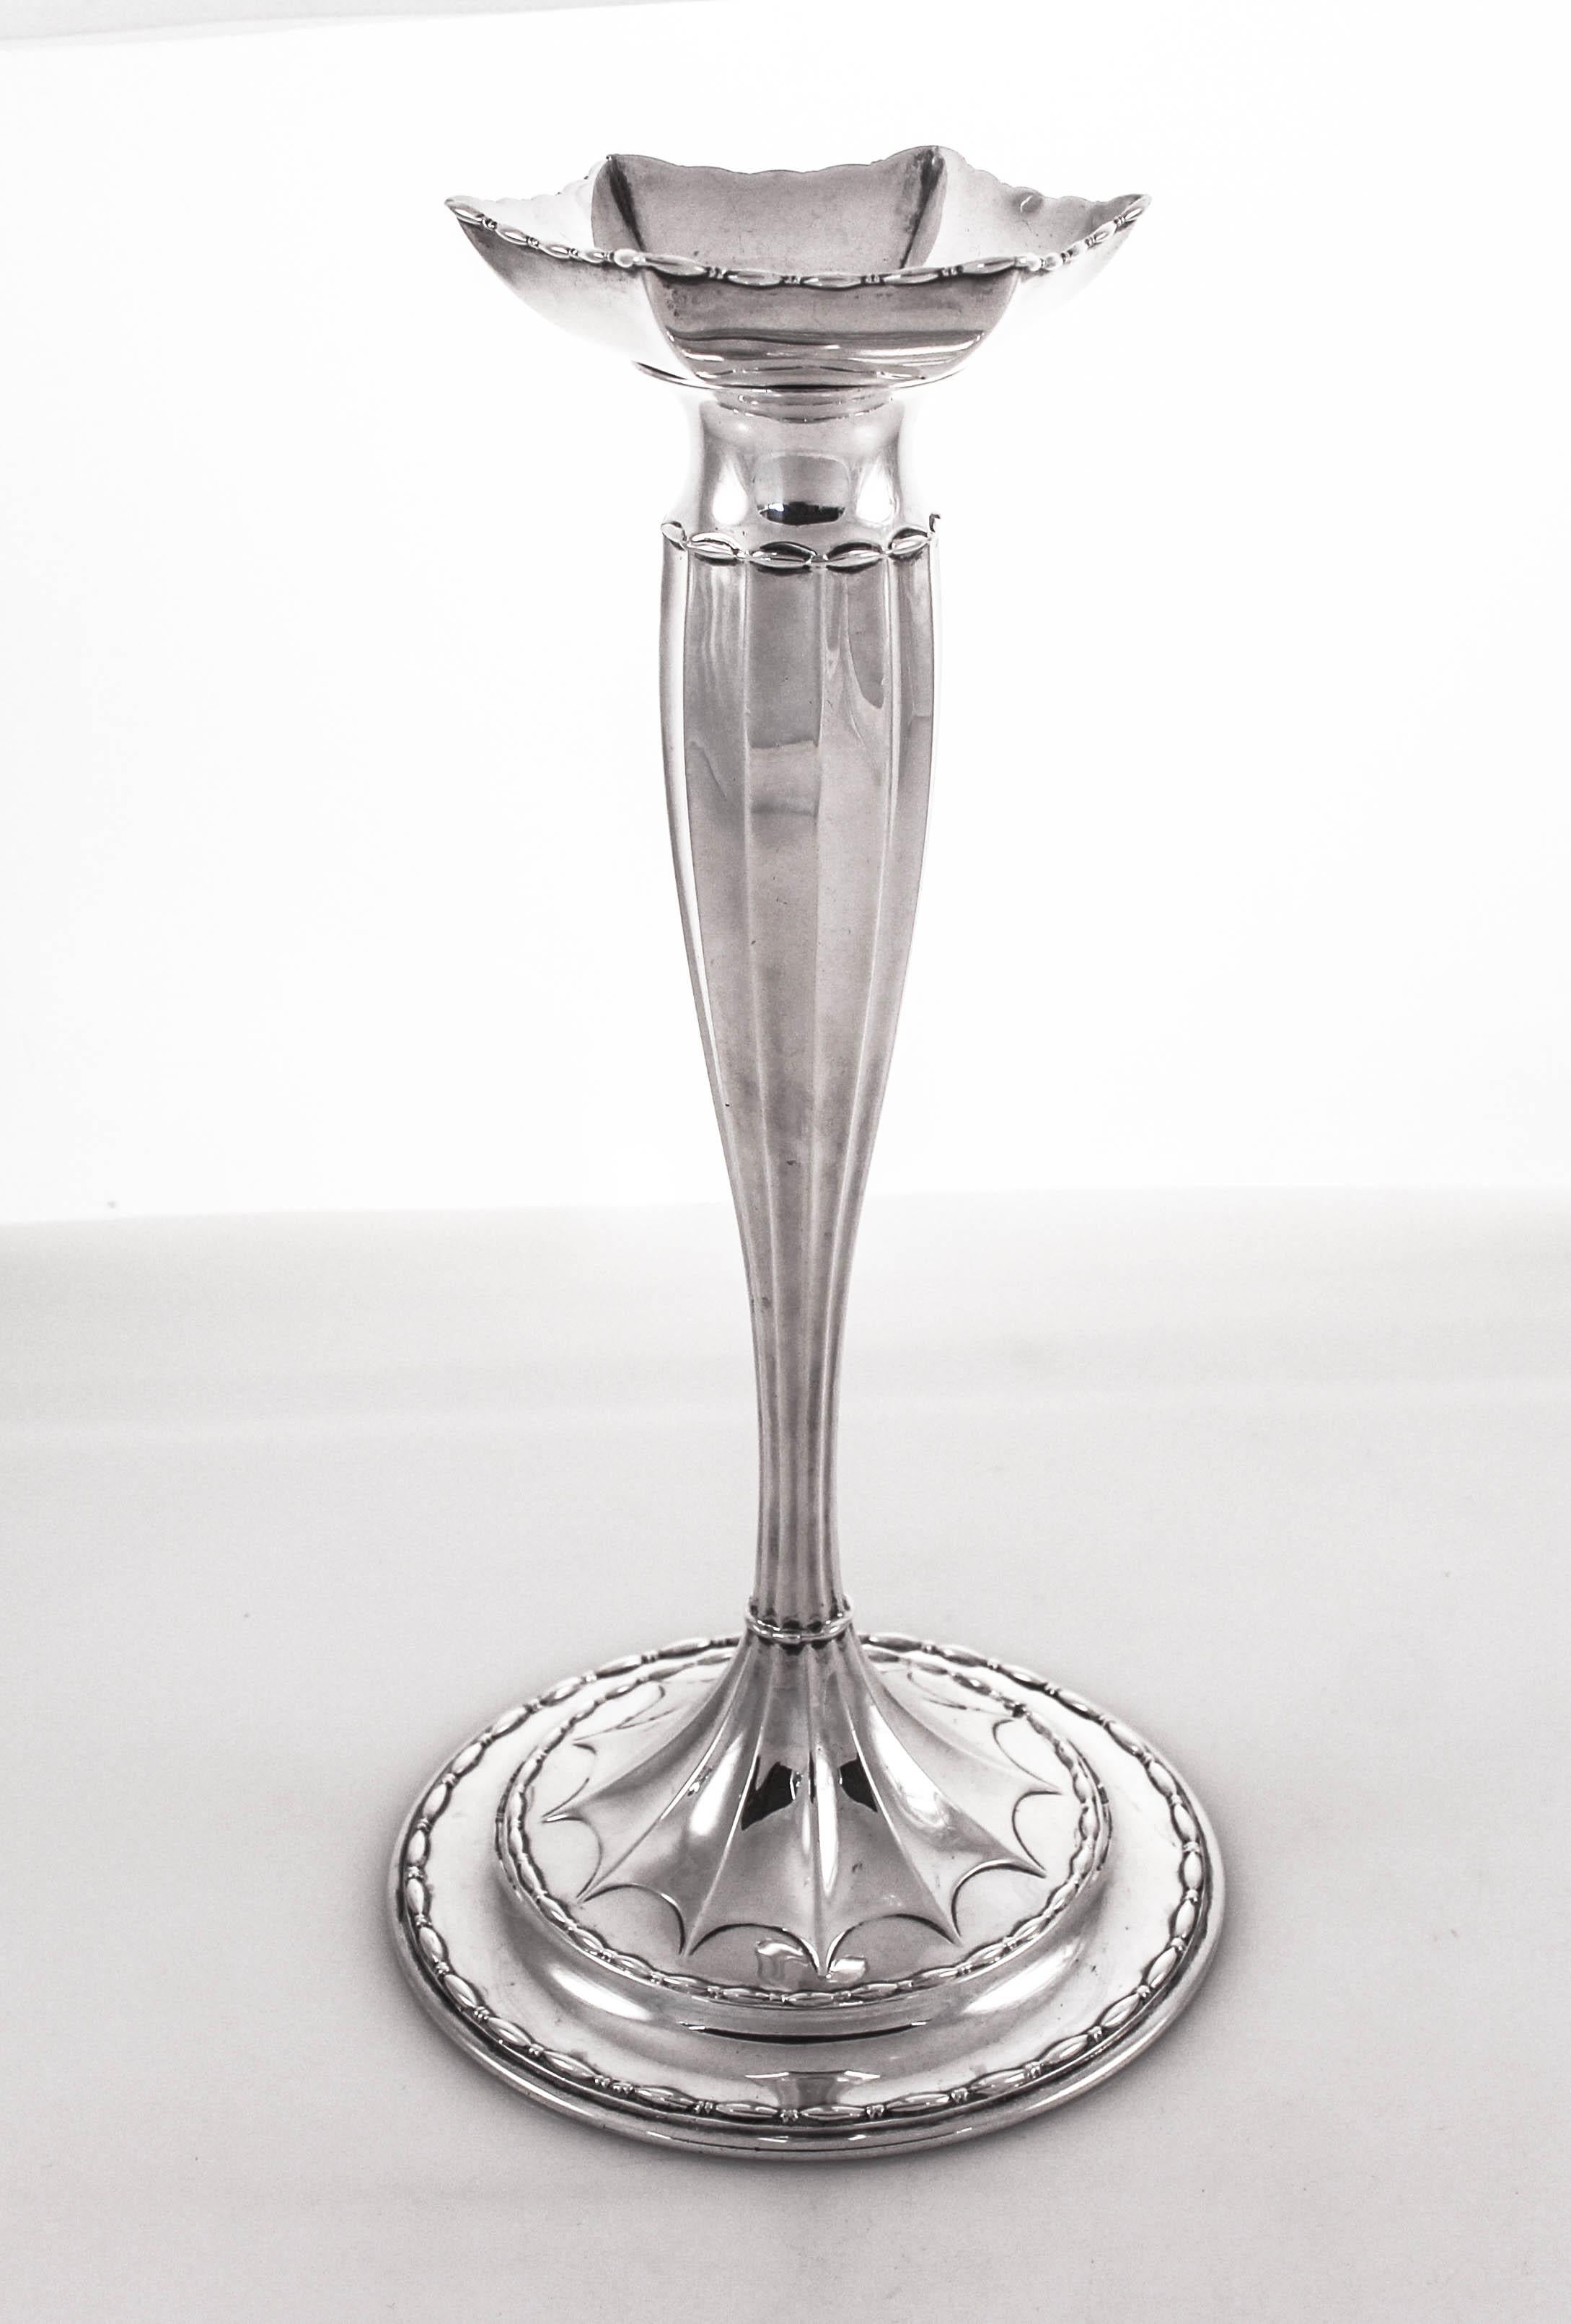 We are proud to offer this pair of sterling silver candlesticks by Tiffany and CO. They have a tapered shape with a round not weighted base. The bobeche has a hexagon shape and is removable. Around the base a web-like pattern compliments the